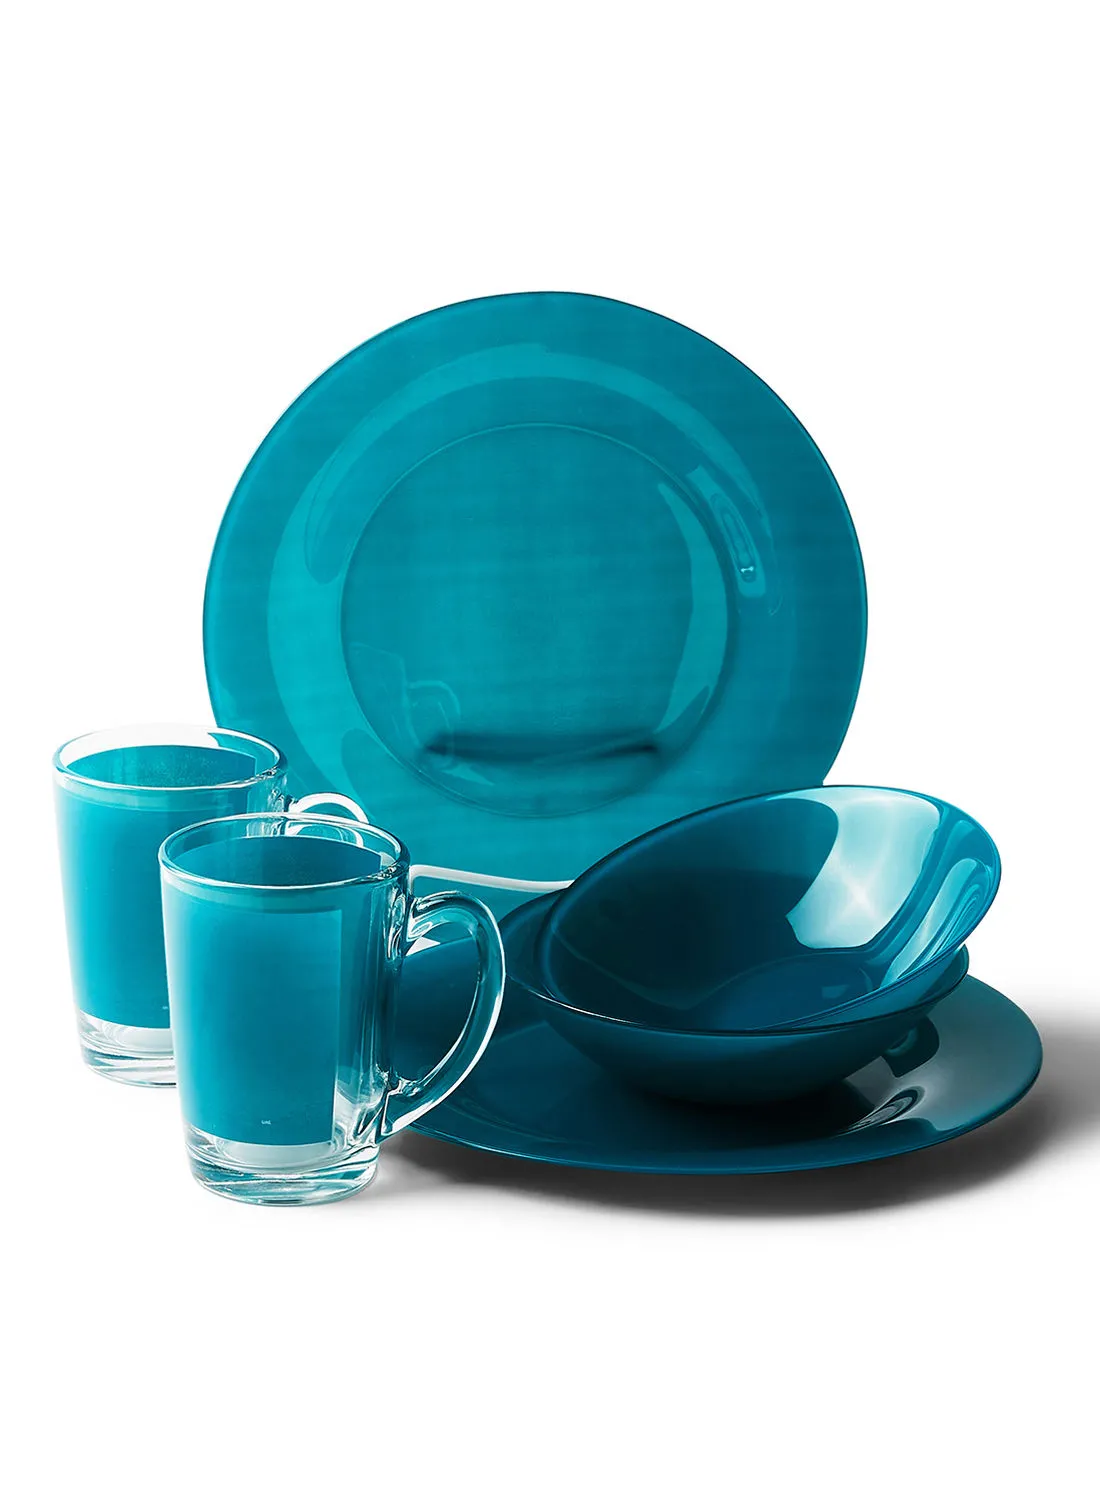 noon east 6 Piece Glass Dinner Set For Everyday Use - Light Weight Dishes, Plates - Dinner Plate, Bowl - Serves 2 - Turquoise